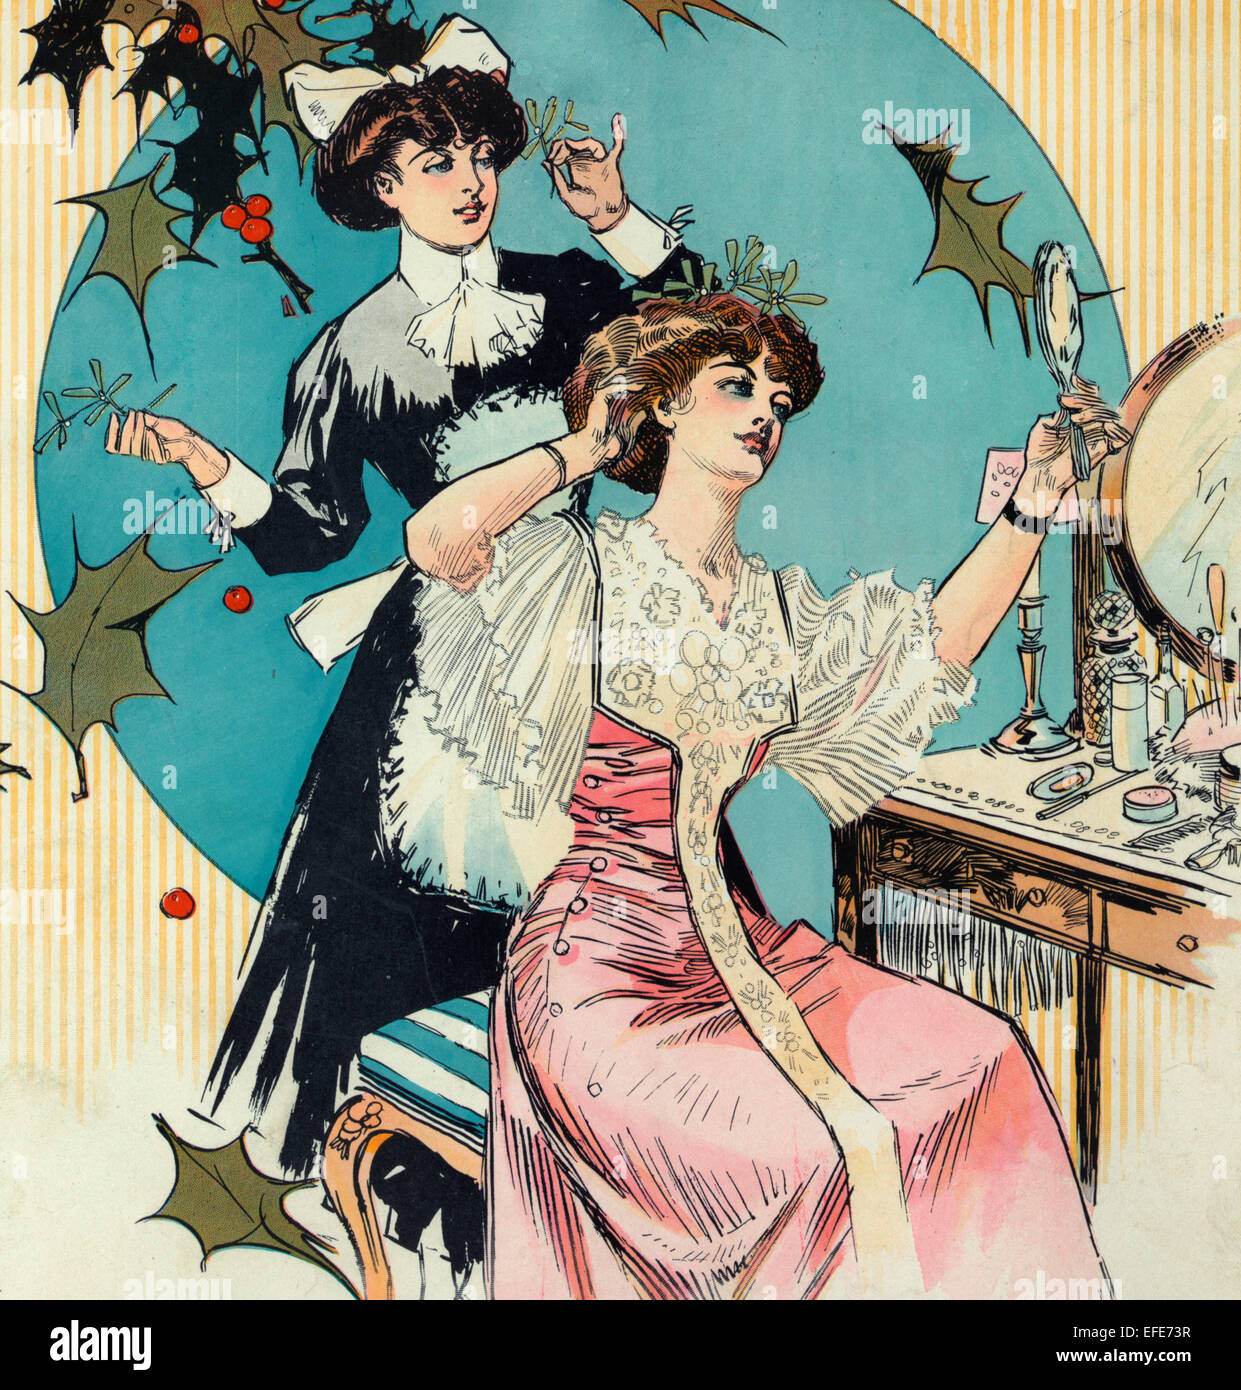 https://c8.alamy.com/comp/EFE73R/christmas-1908-illustration-shows-a-young-woman-sitting-at-her-dressing-EFE73R.jpg